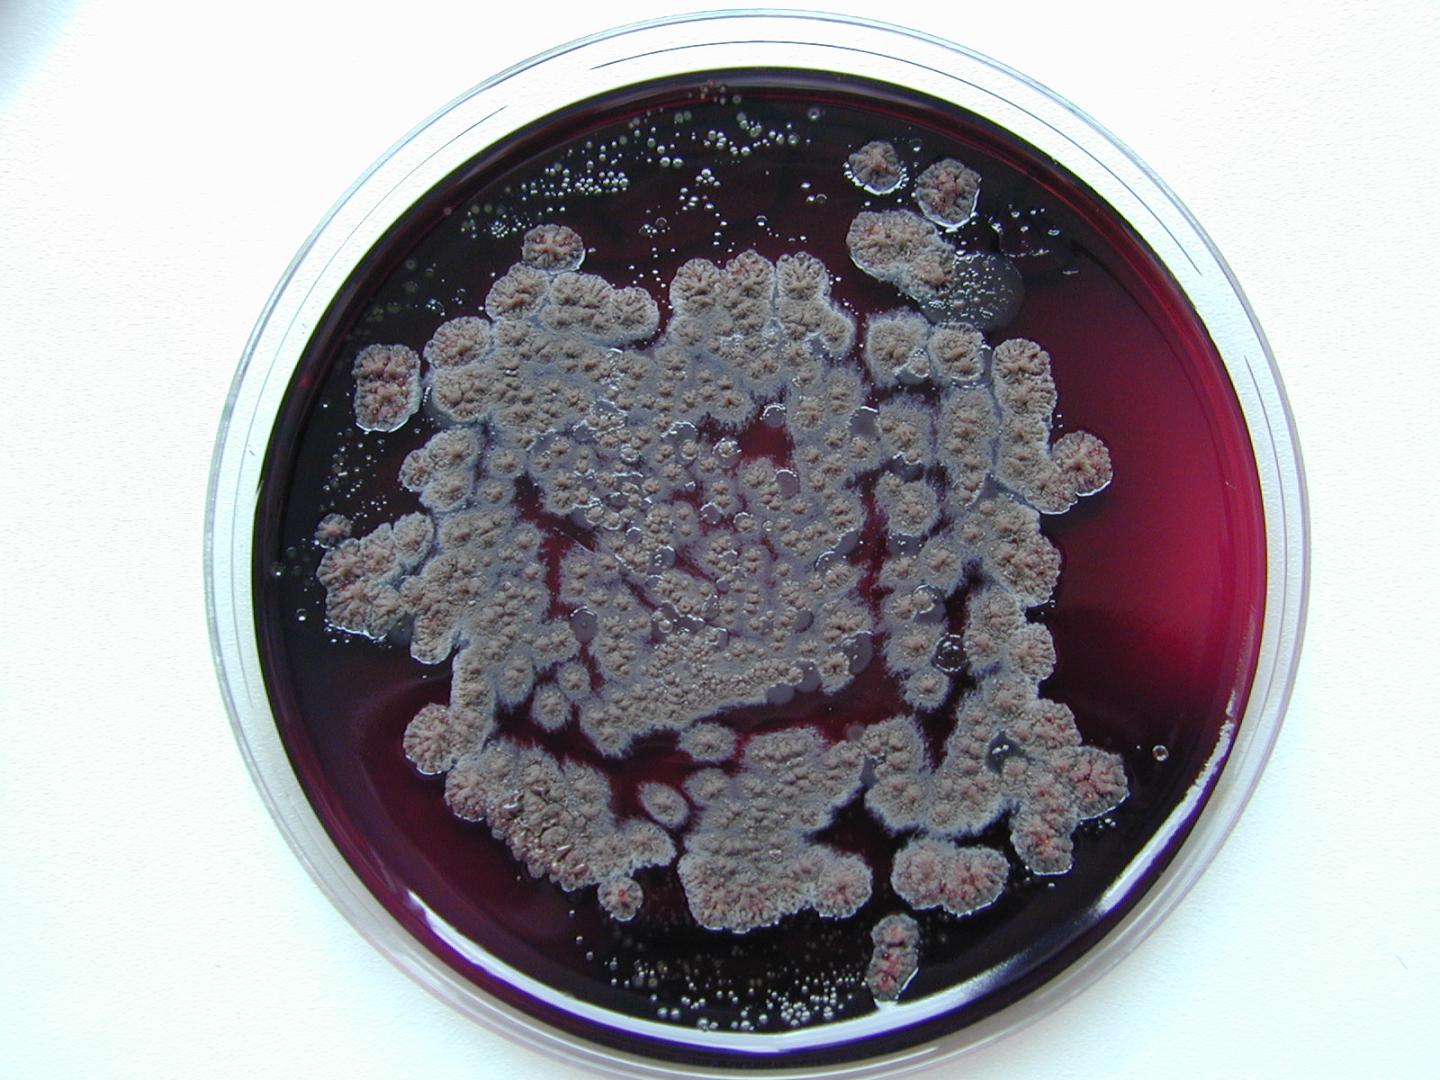 Soil Bacteria in the Lab